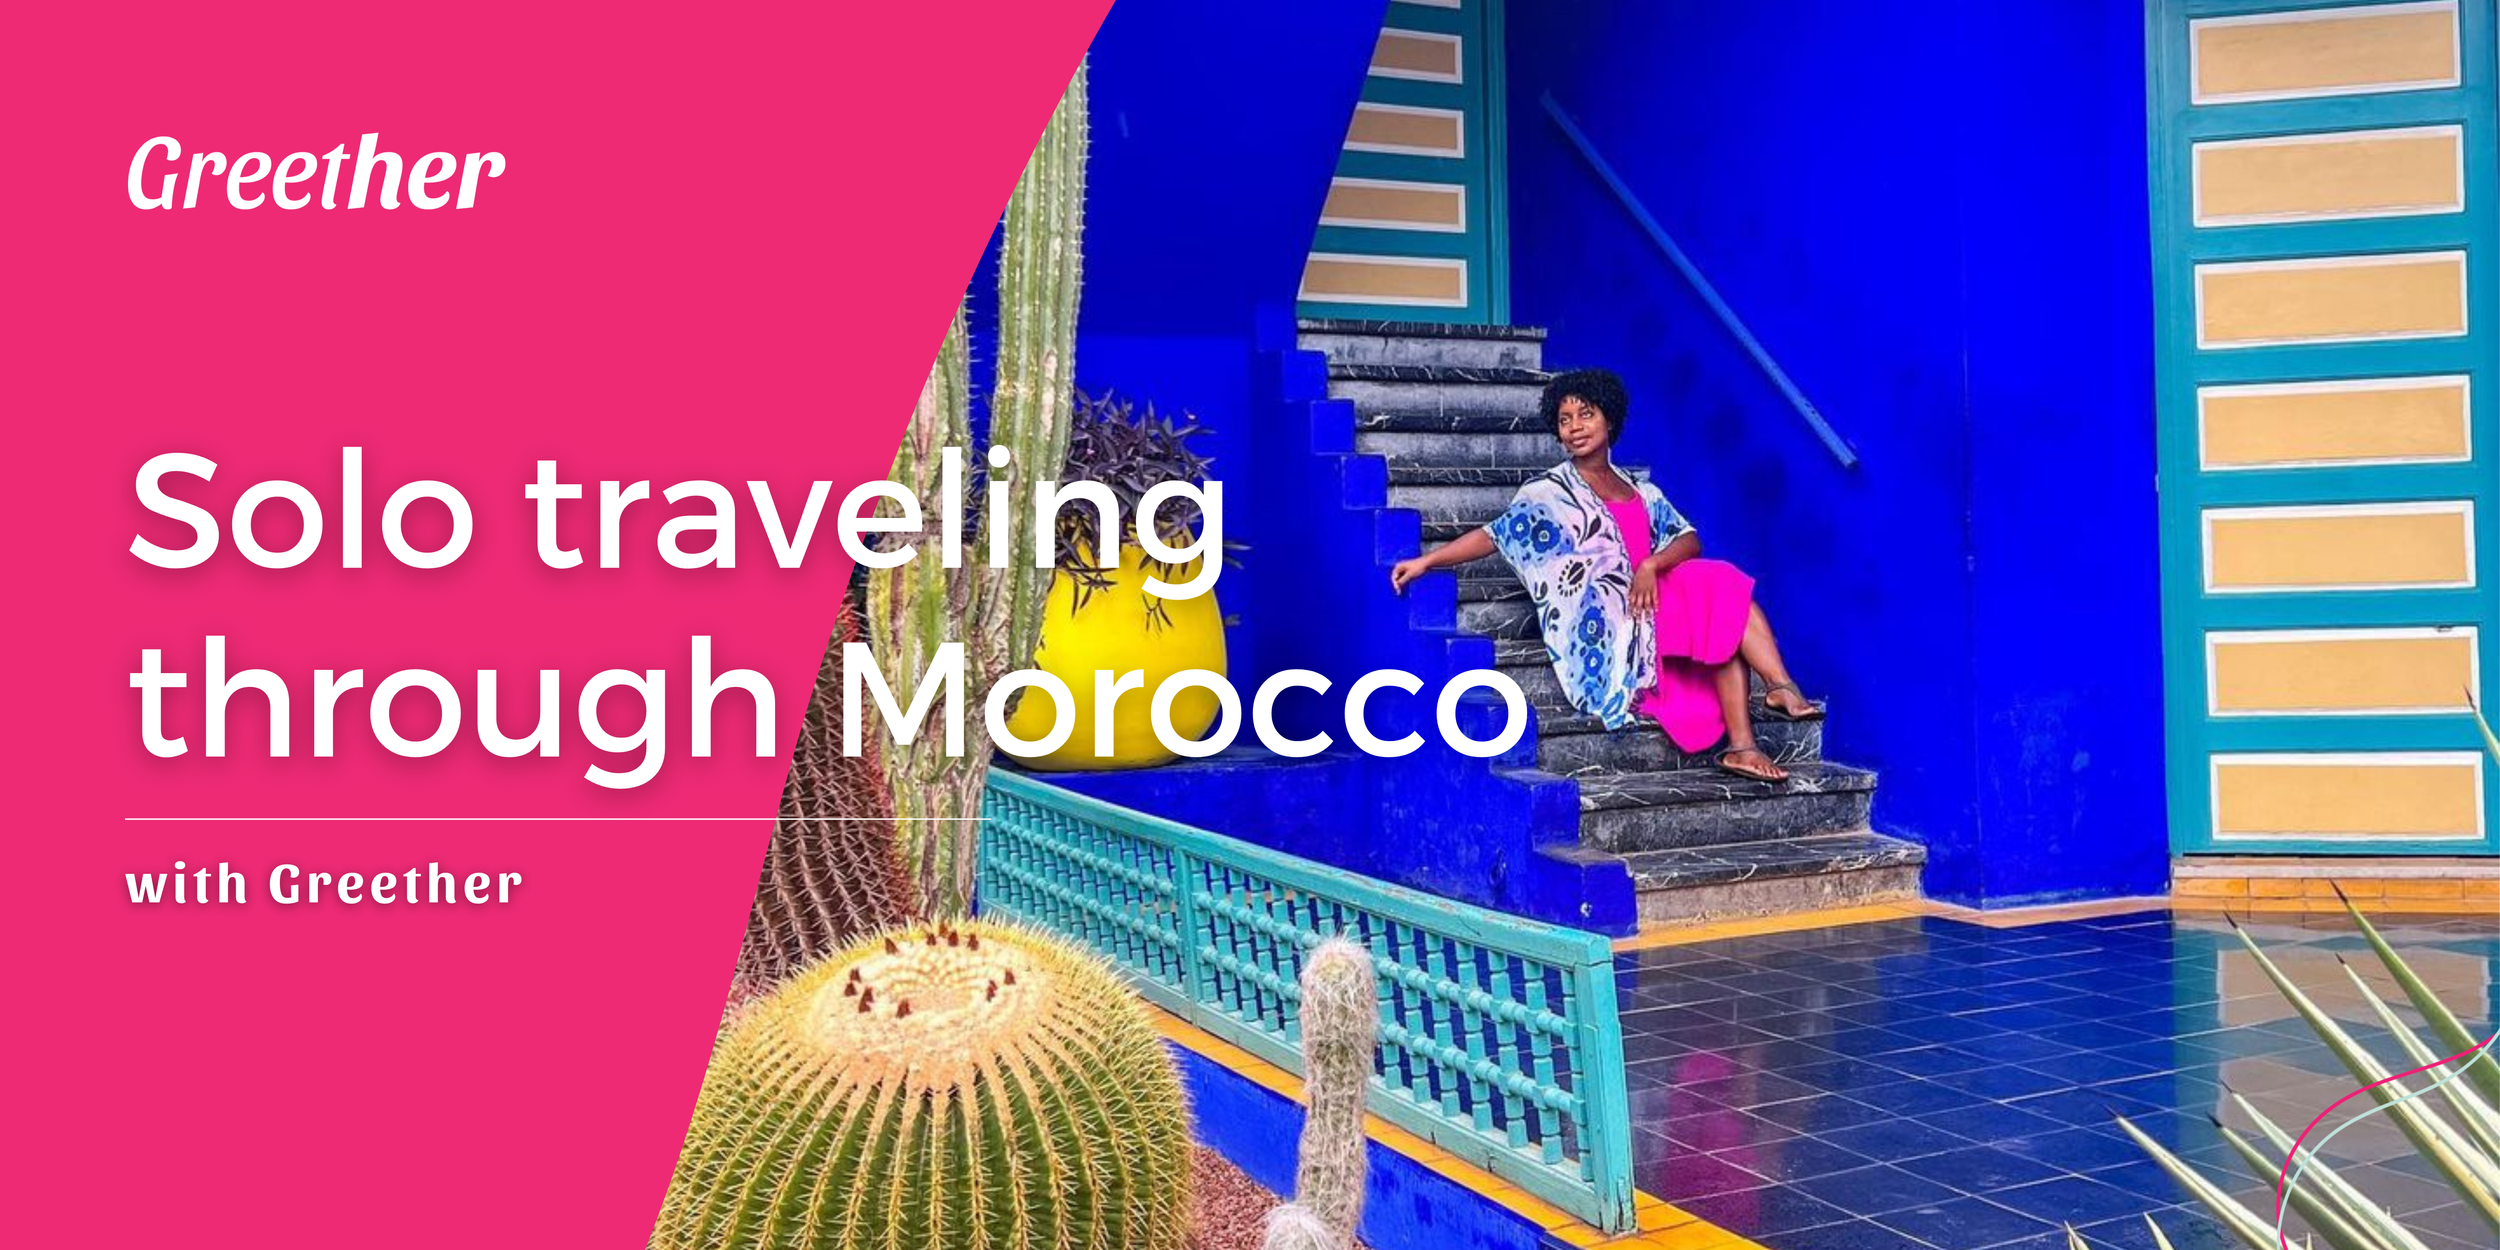 Solo traveling through Morocco with Greether